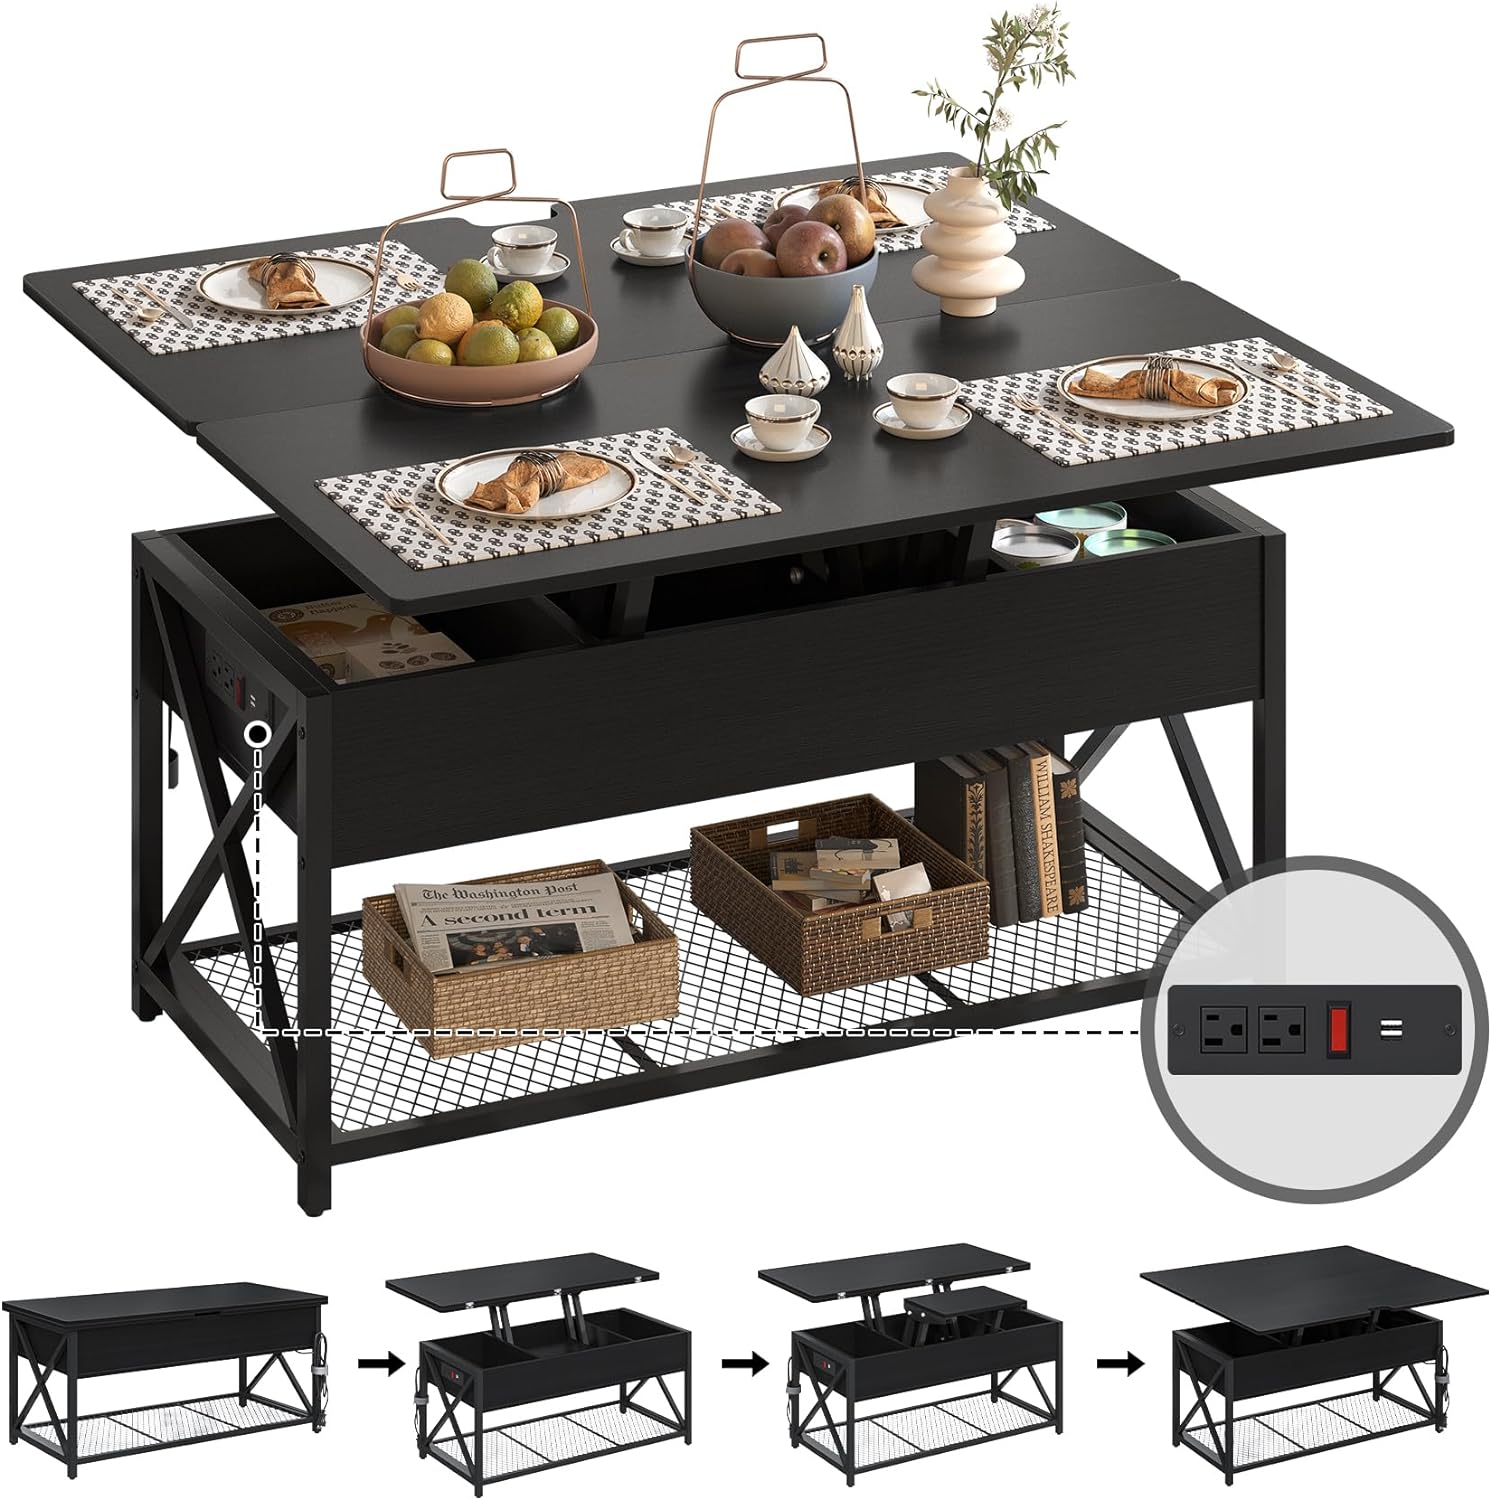 43 Lift Top Coffee Table with Charging Station, 4 in 1 Coffee Table with Storage, Black Coffee Table Converts to Dining Table for Living Room, Game Table, Home Office